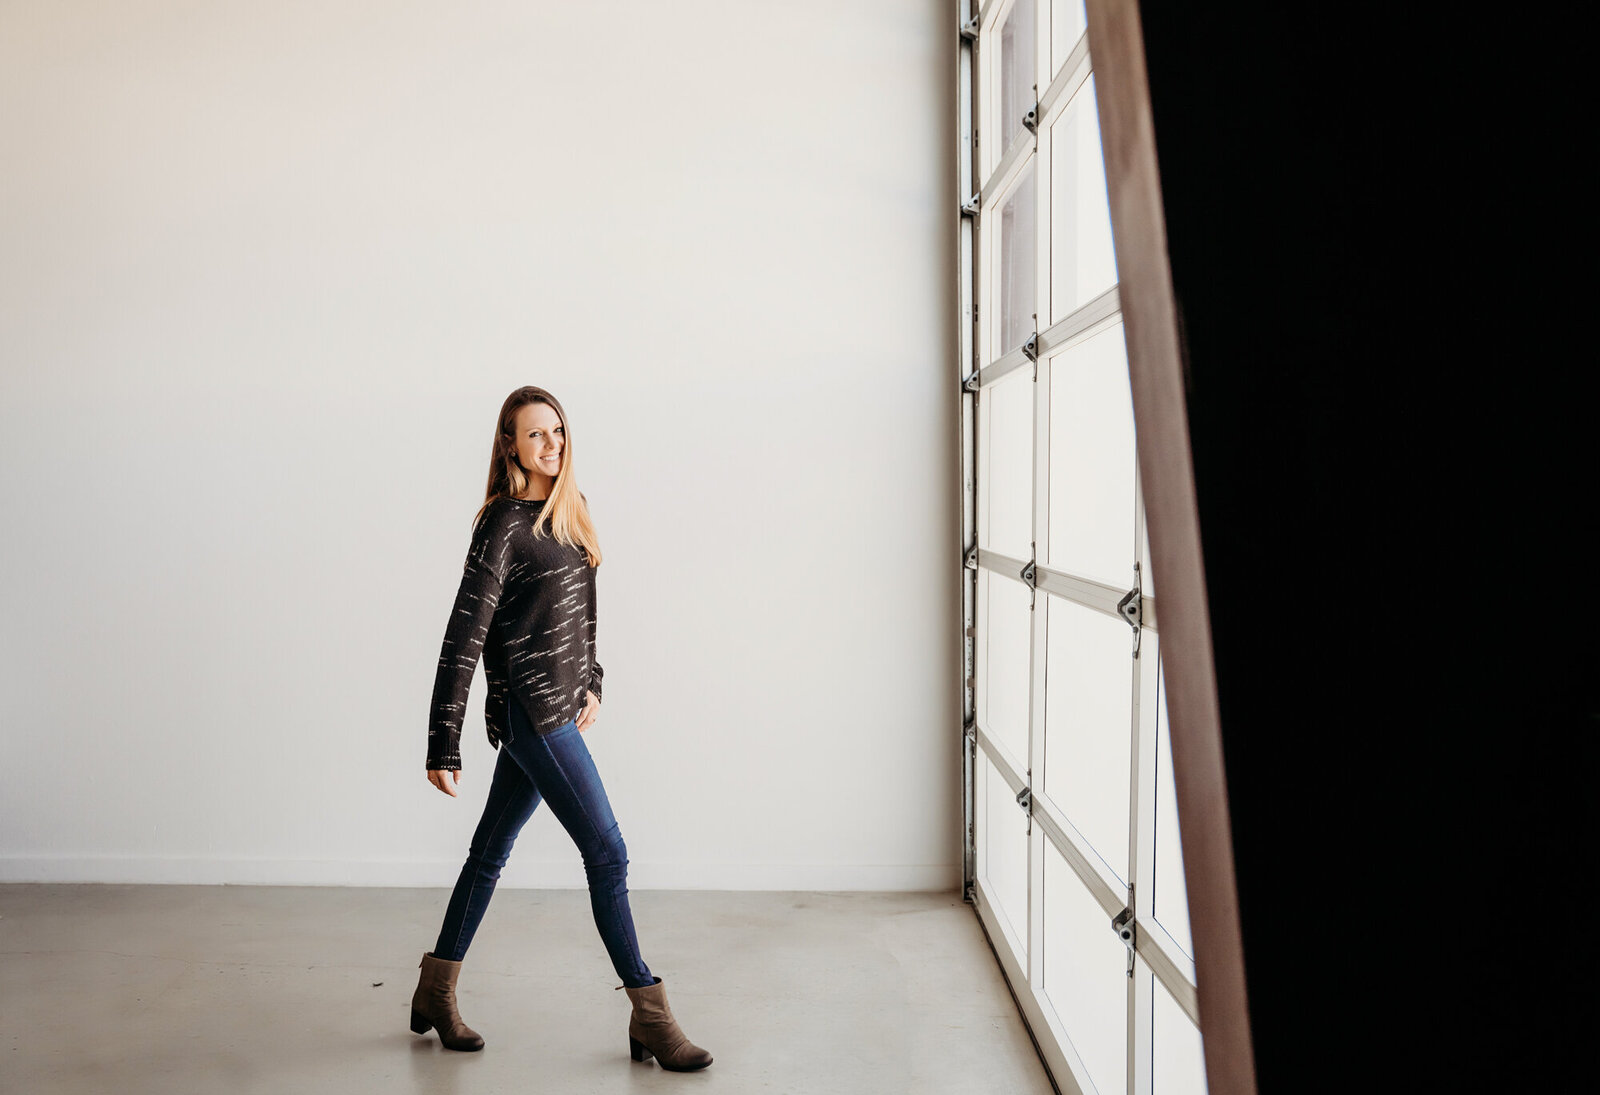 Branding Photographer,  a woman in boots, jeans, and a jacket walks across an empty and well-lit studio